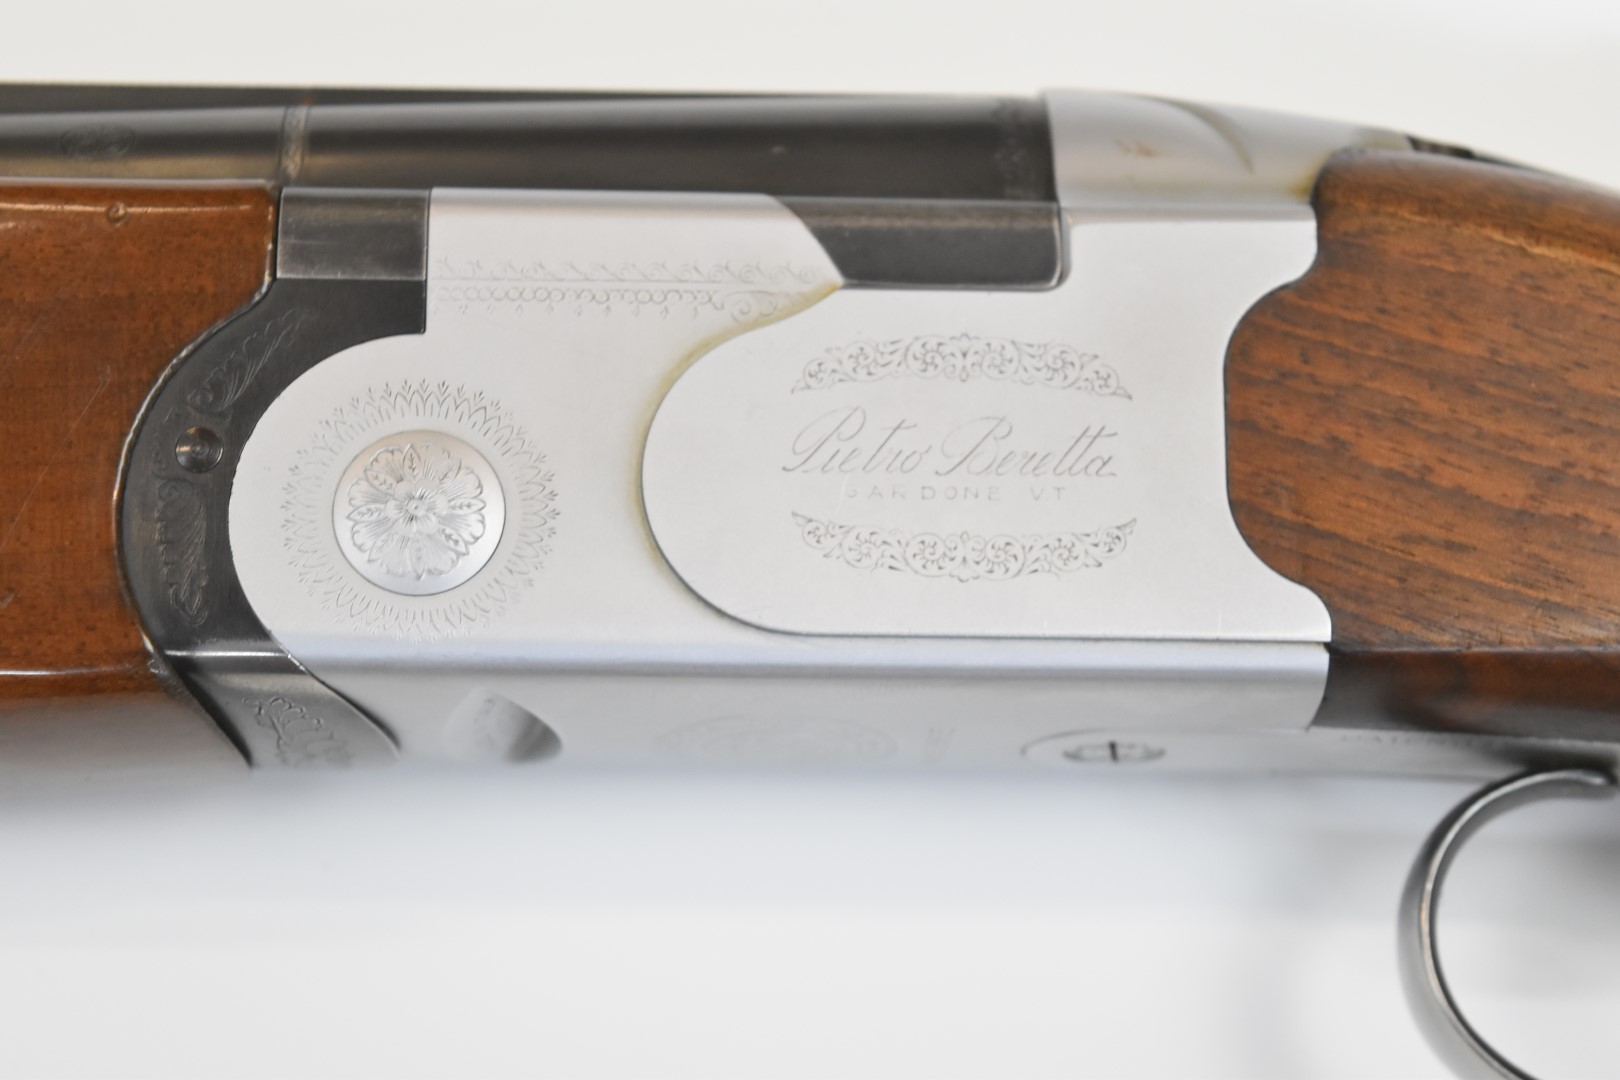 Beretta S685E 12 bore over and under ejector shotgun with engraved lock, underside, trigger guard, - Image 11 of 11